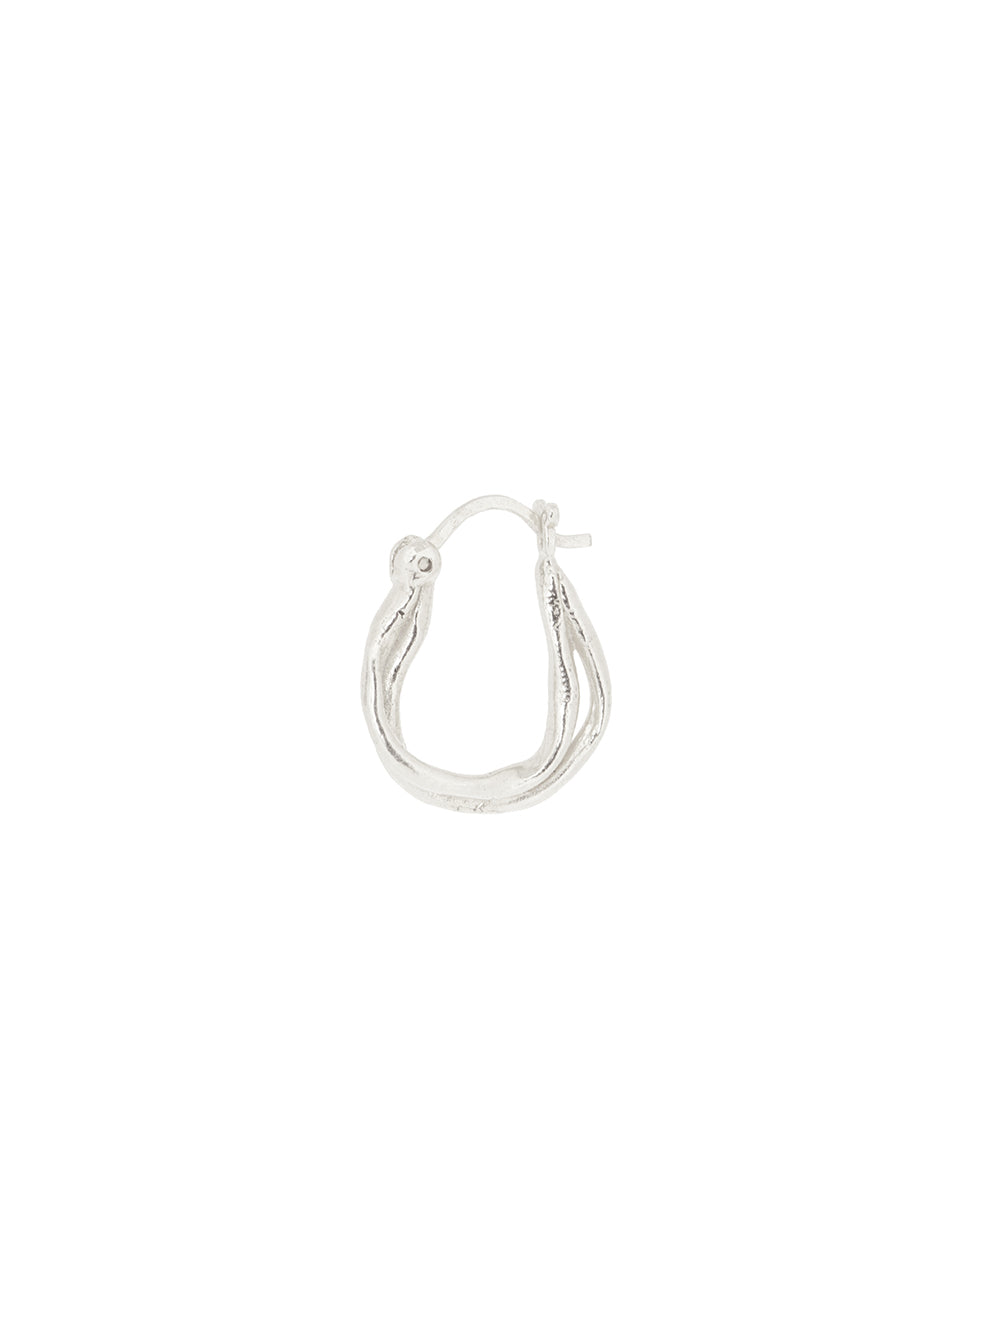 Other way | 925 Sterling Silver